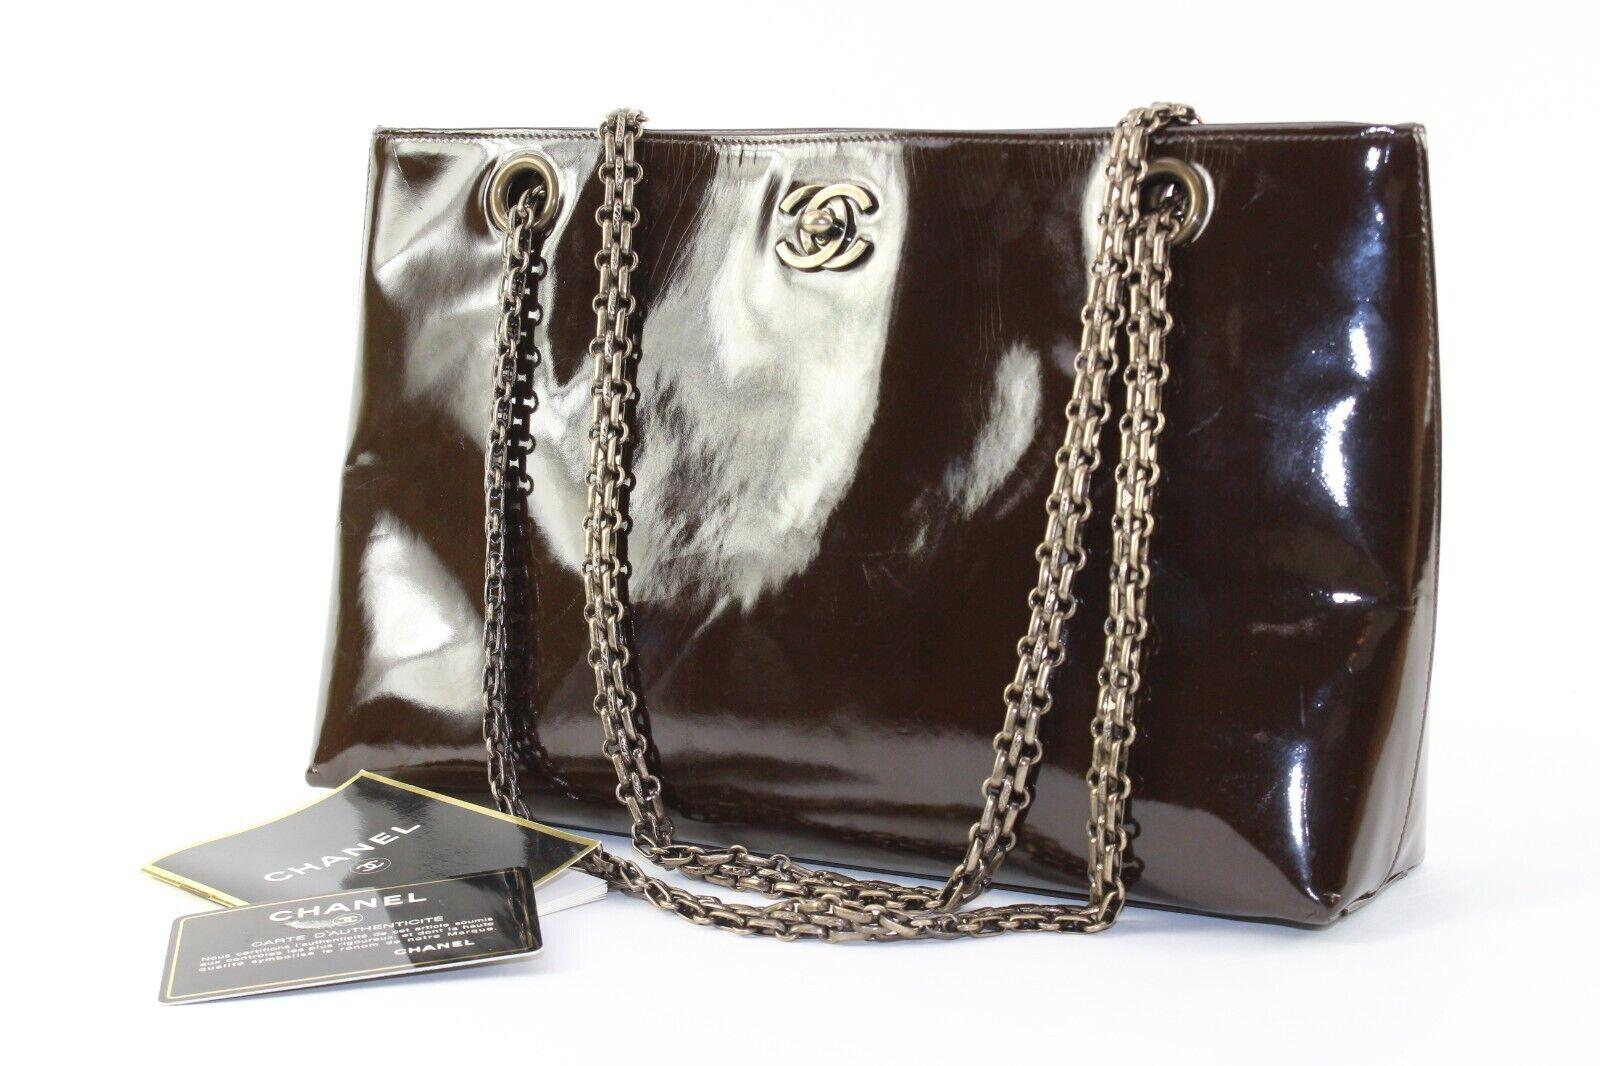 Chanel Patent Crossbody x Tote 2way Chain Bag 3CK1226K For Sale 7